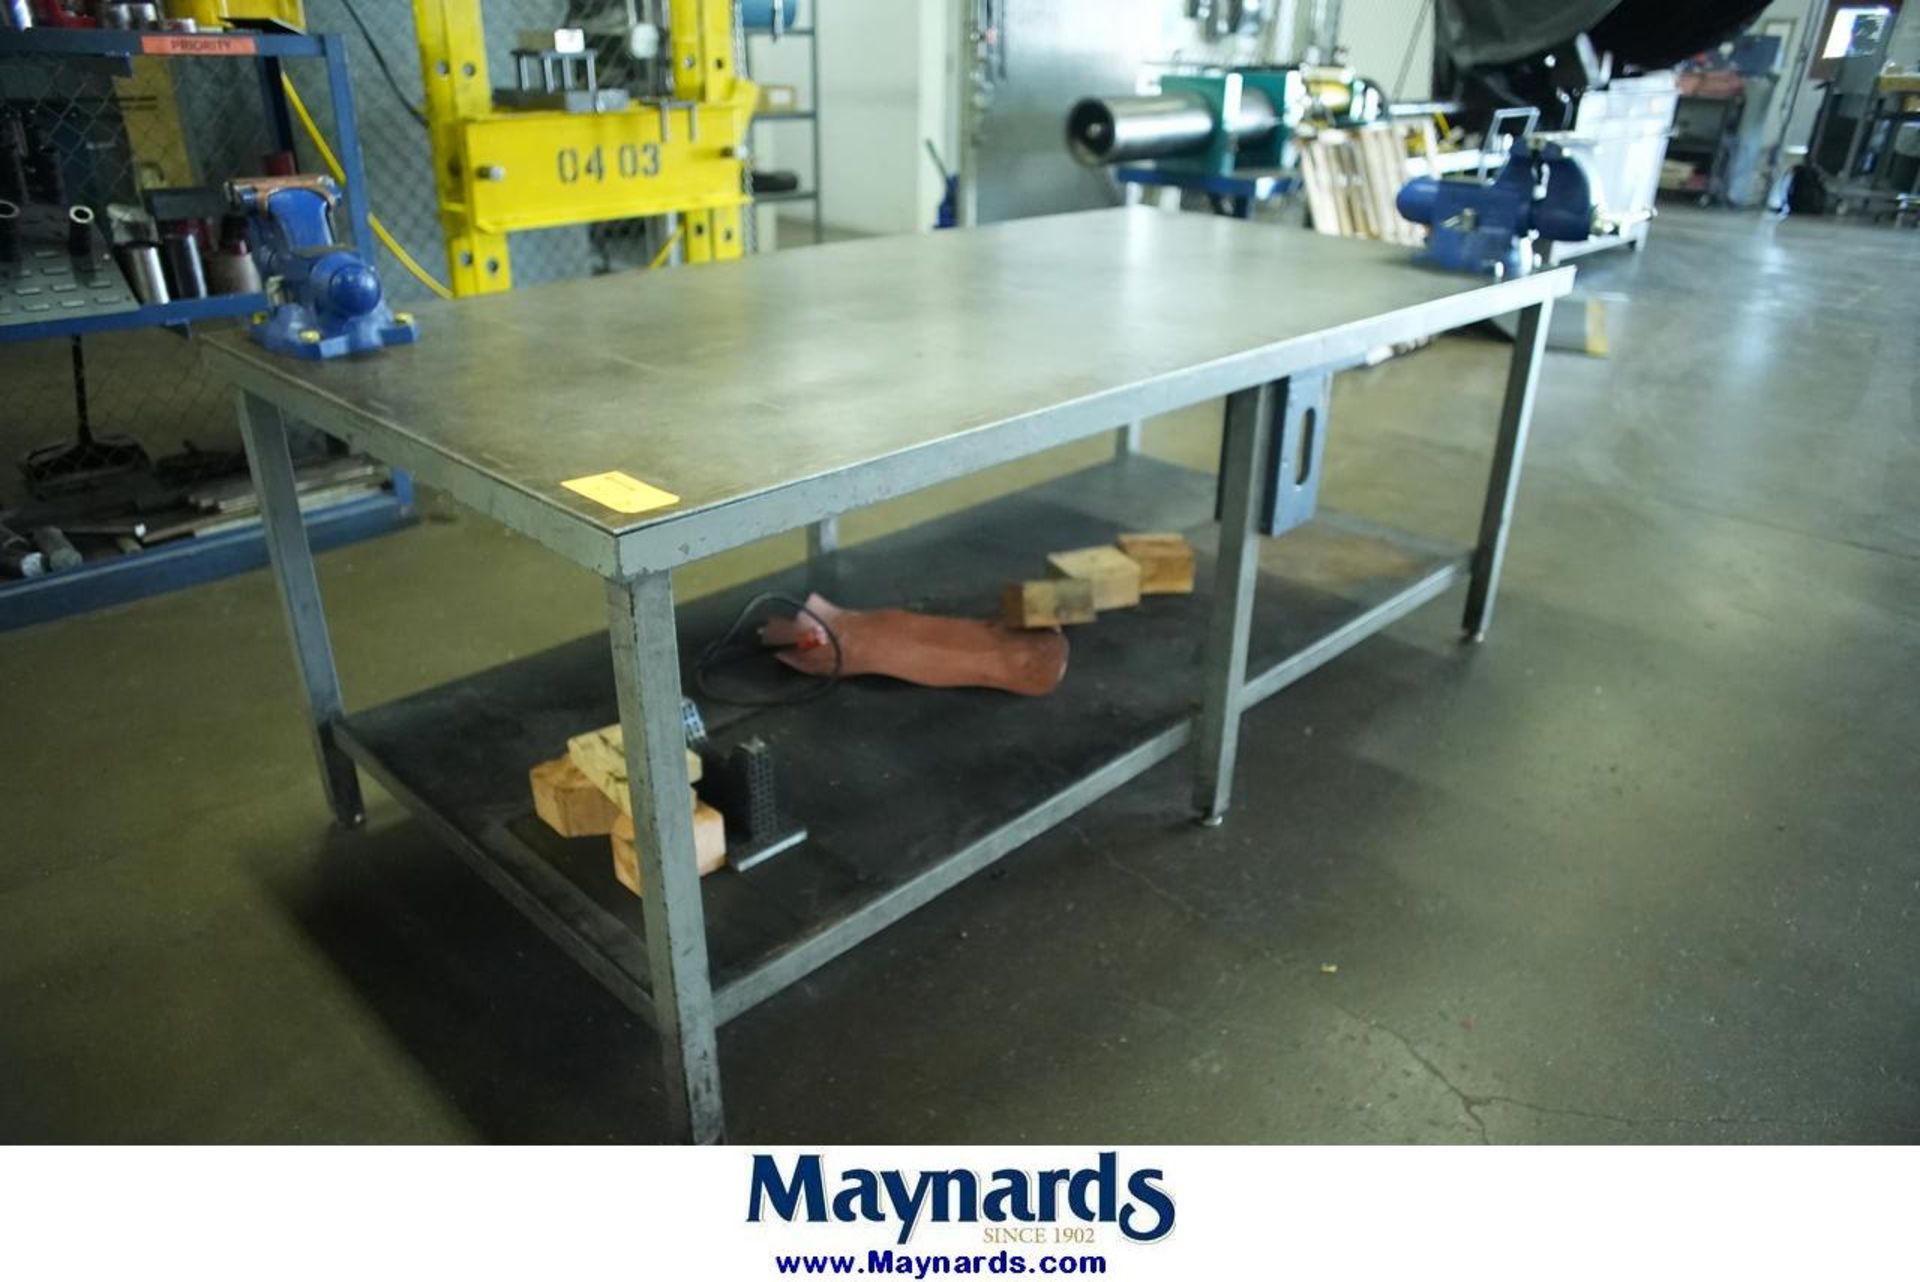 4' x 8' x 3' H Metal Table w/ (2) Bench Vises - Image 3 of 6